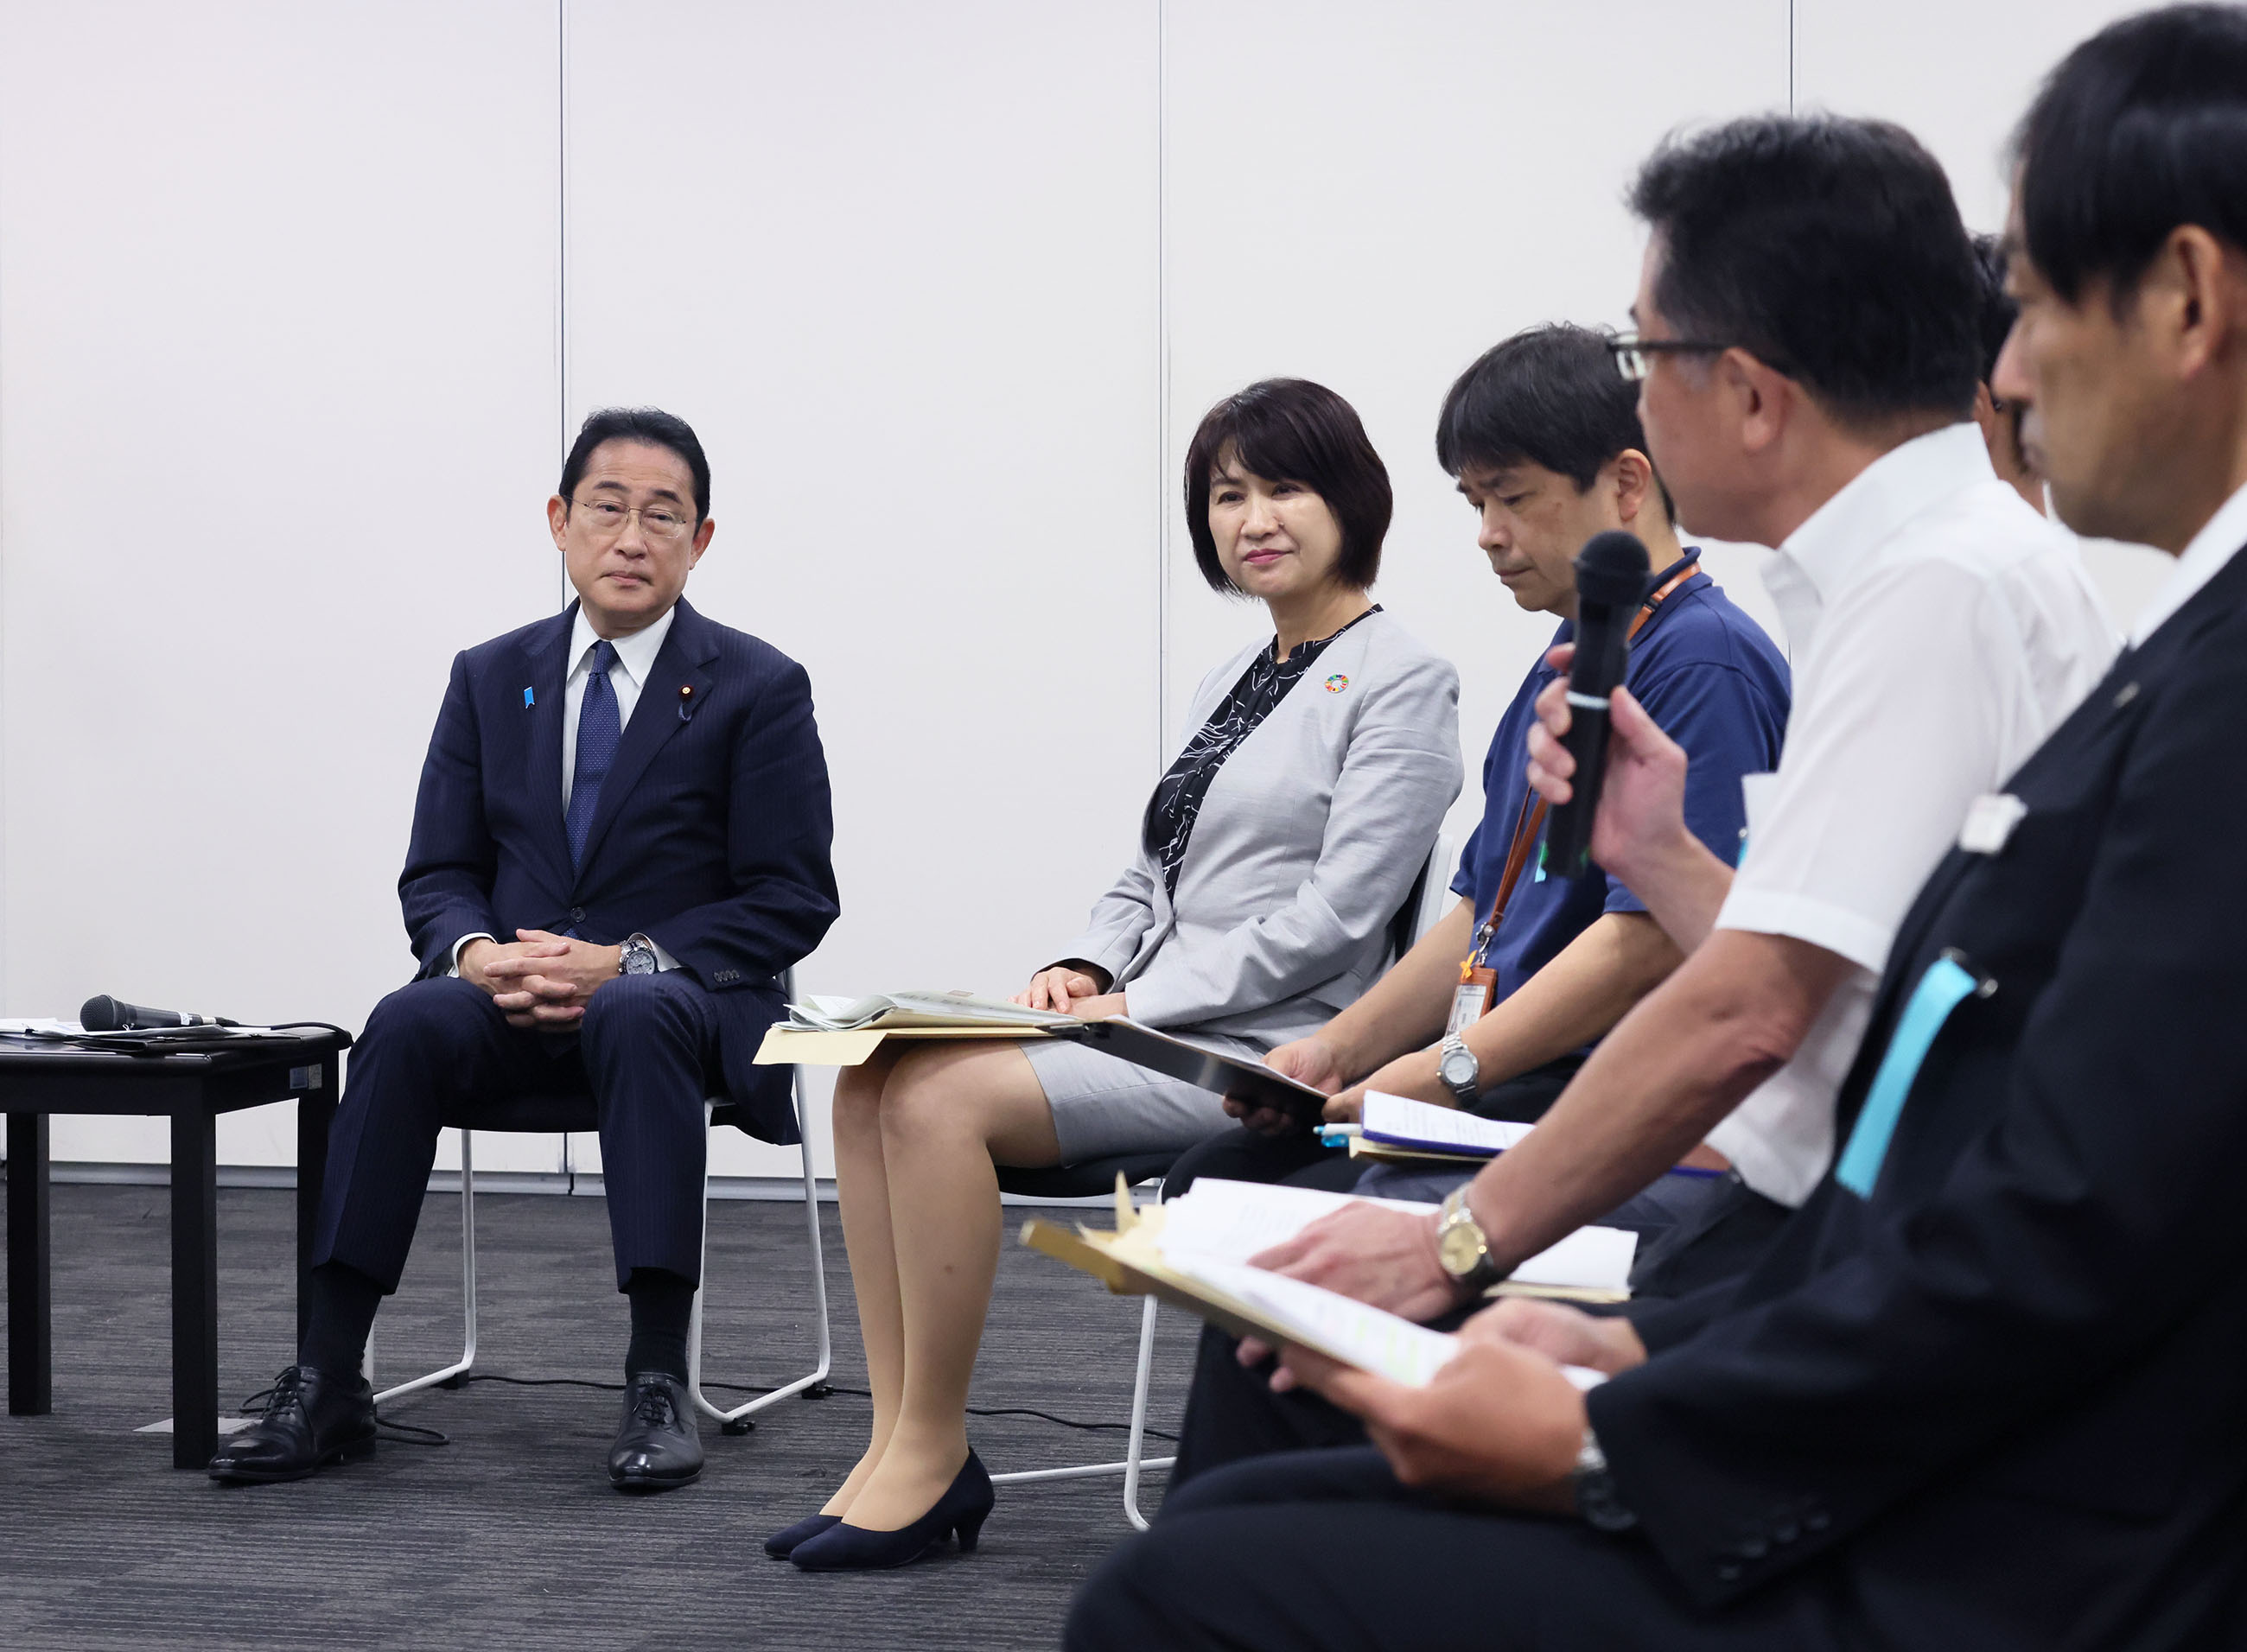 Prime Minister Kishida listening to other participants in an exchange of views